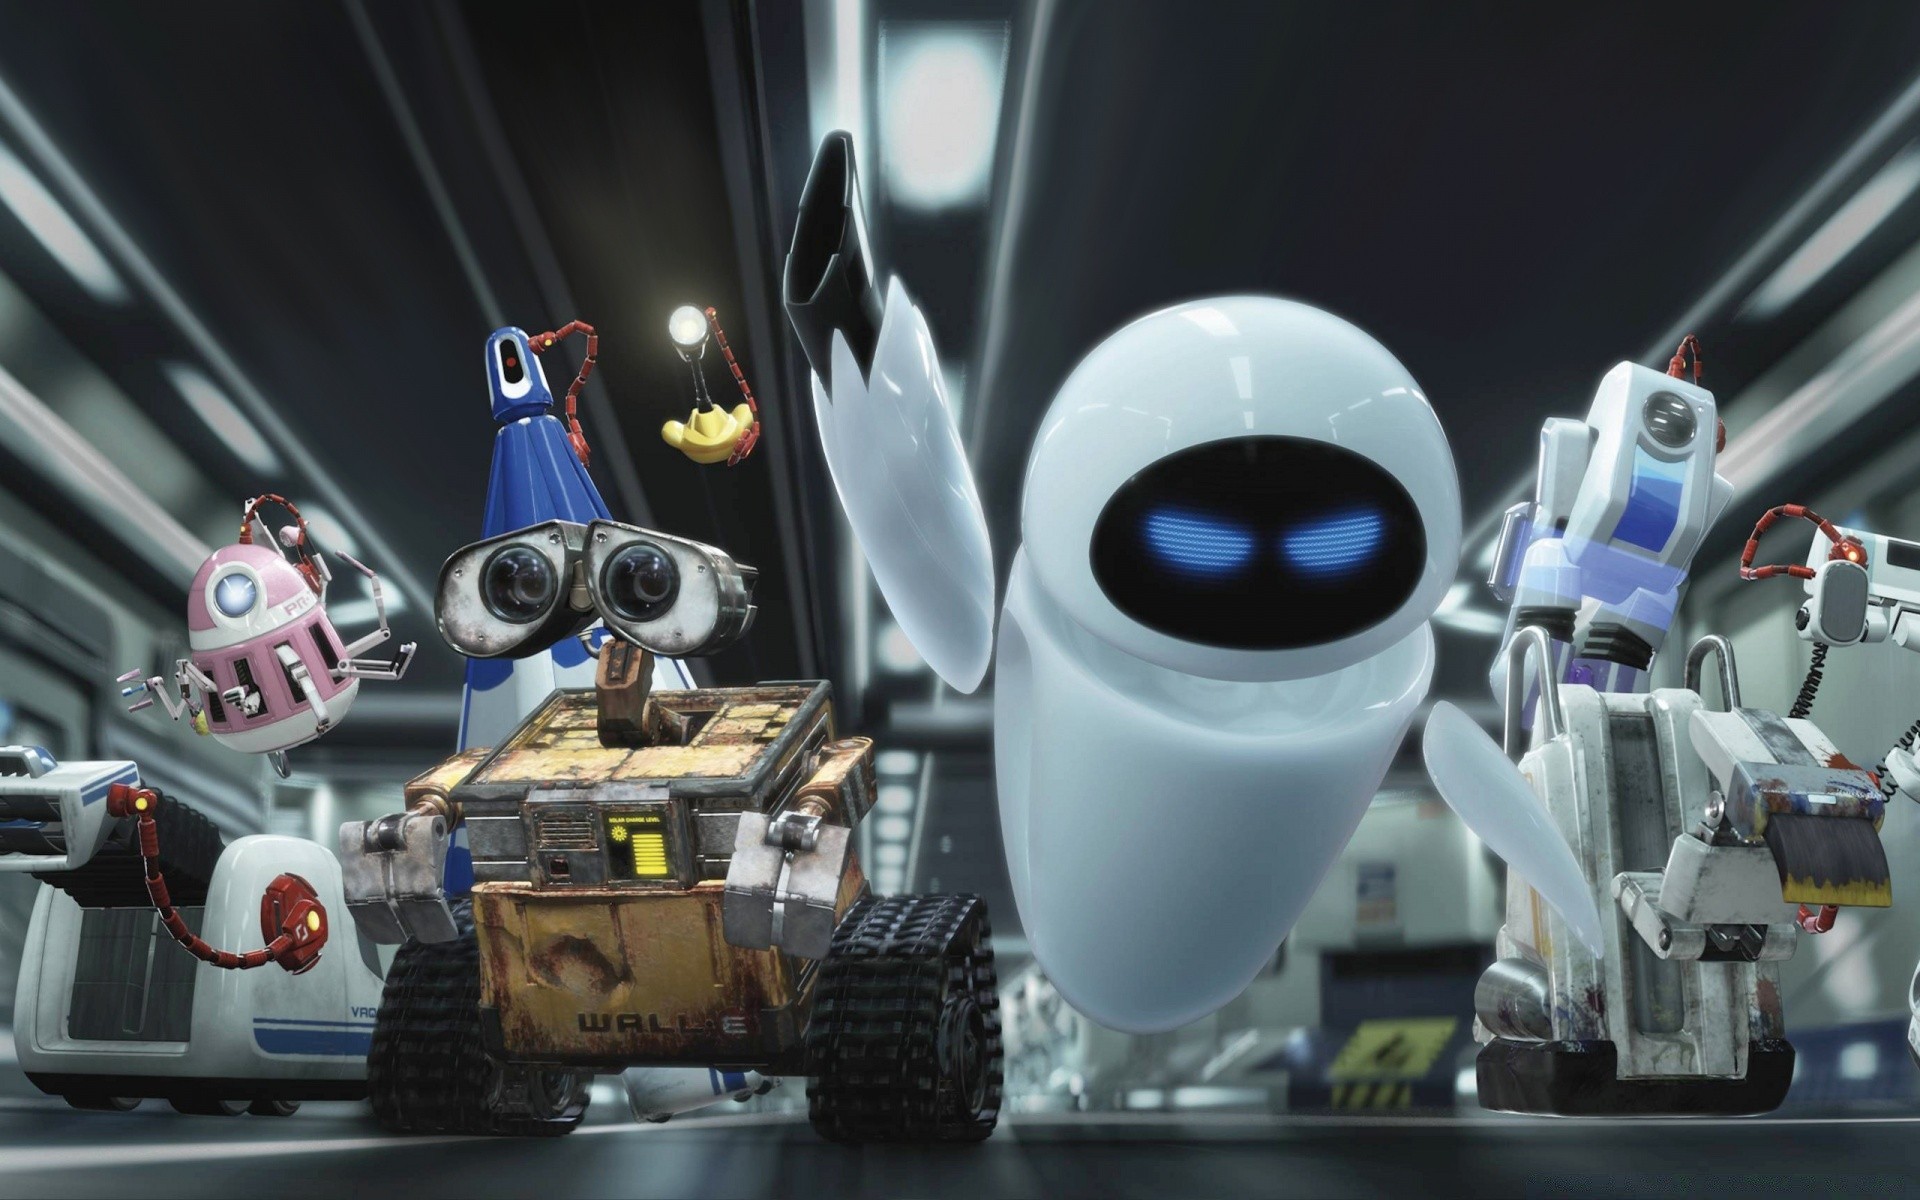 walle vehicle technology car robot transportation system machine industry